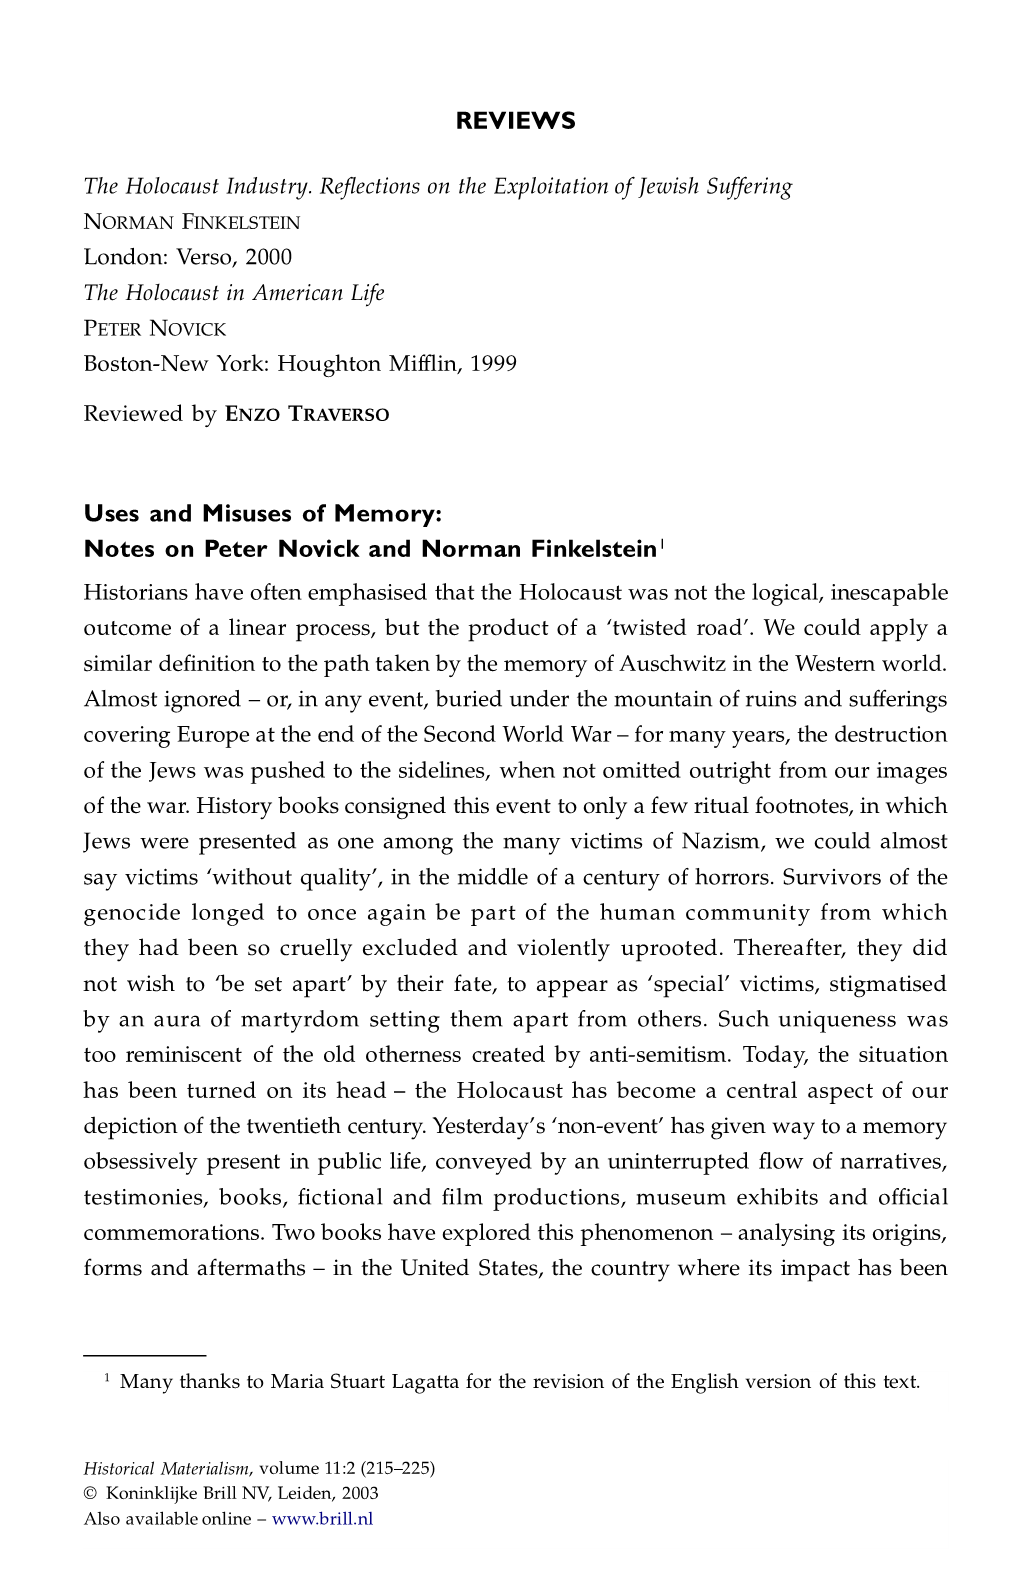 REVIEWS Uses and Misuses of Memory: Notes on Peter Novick And